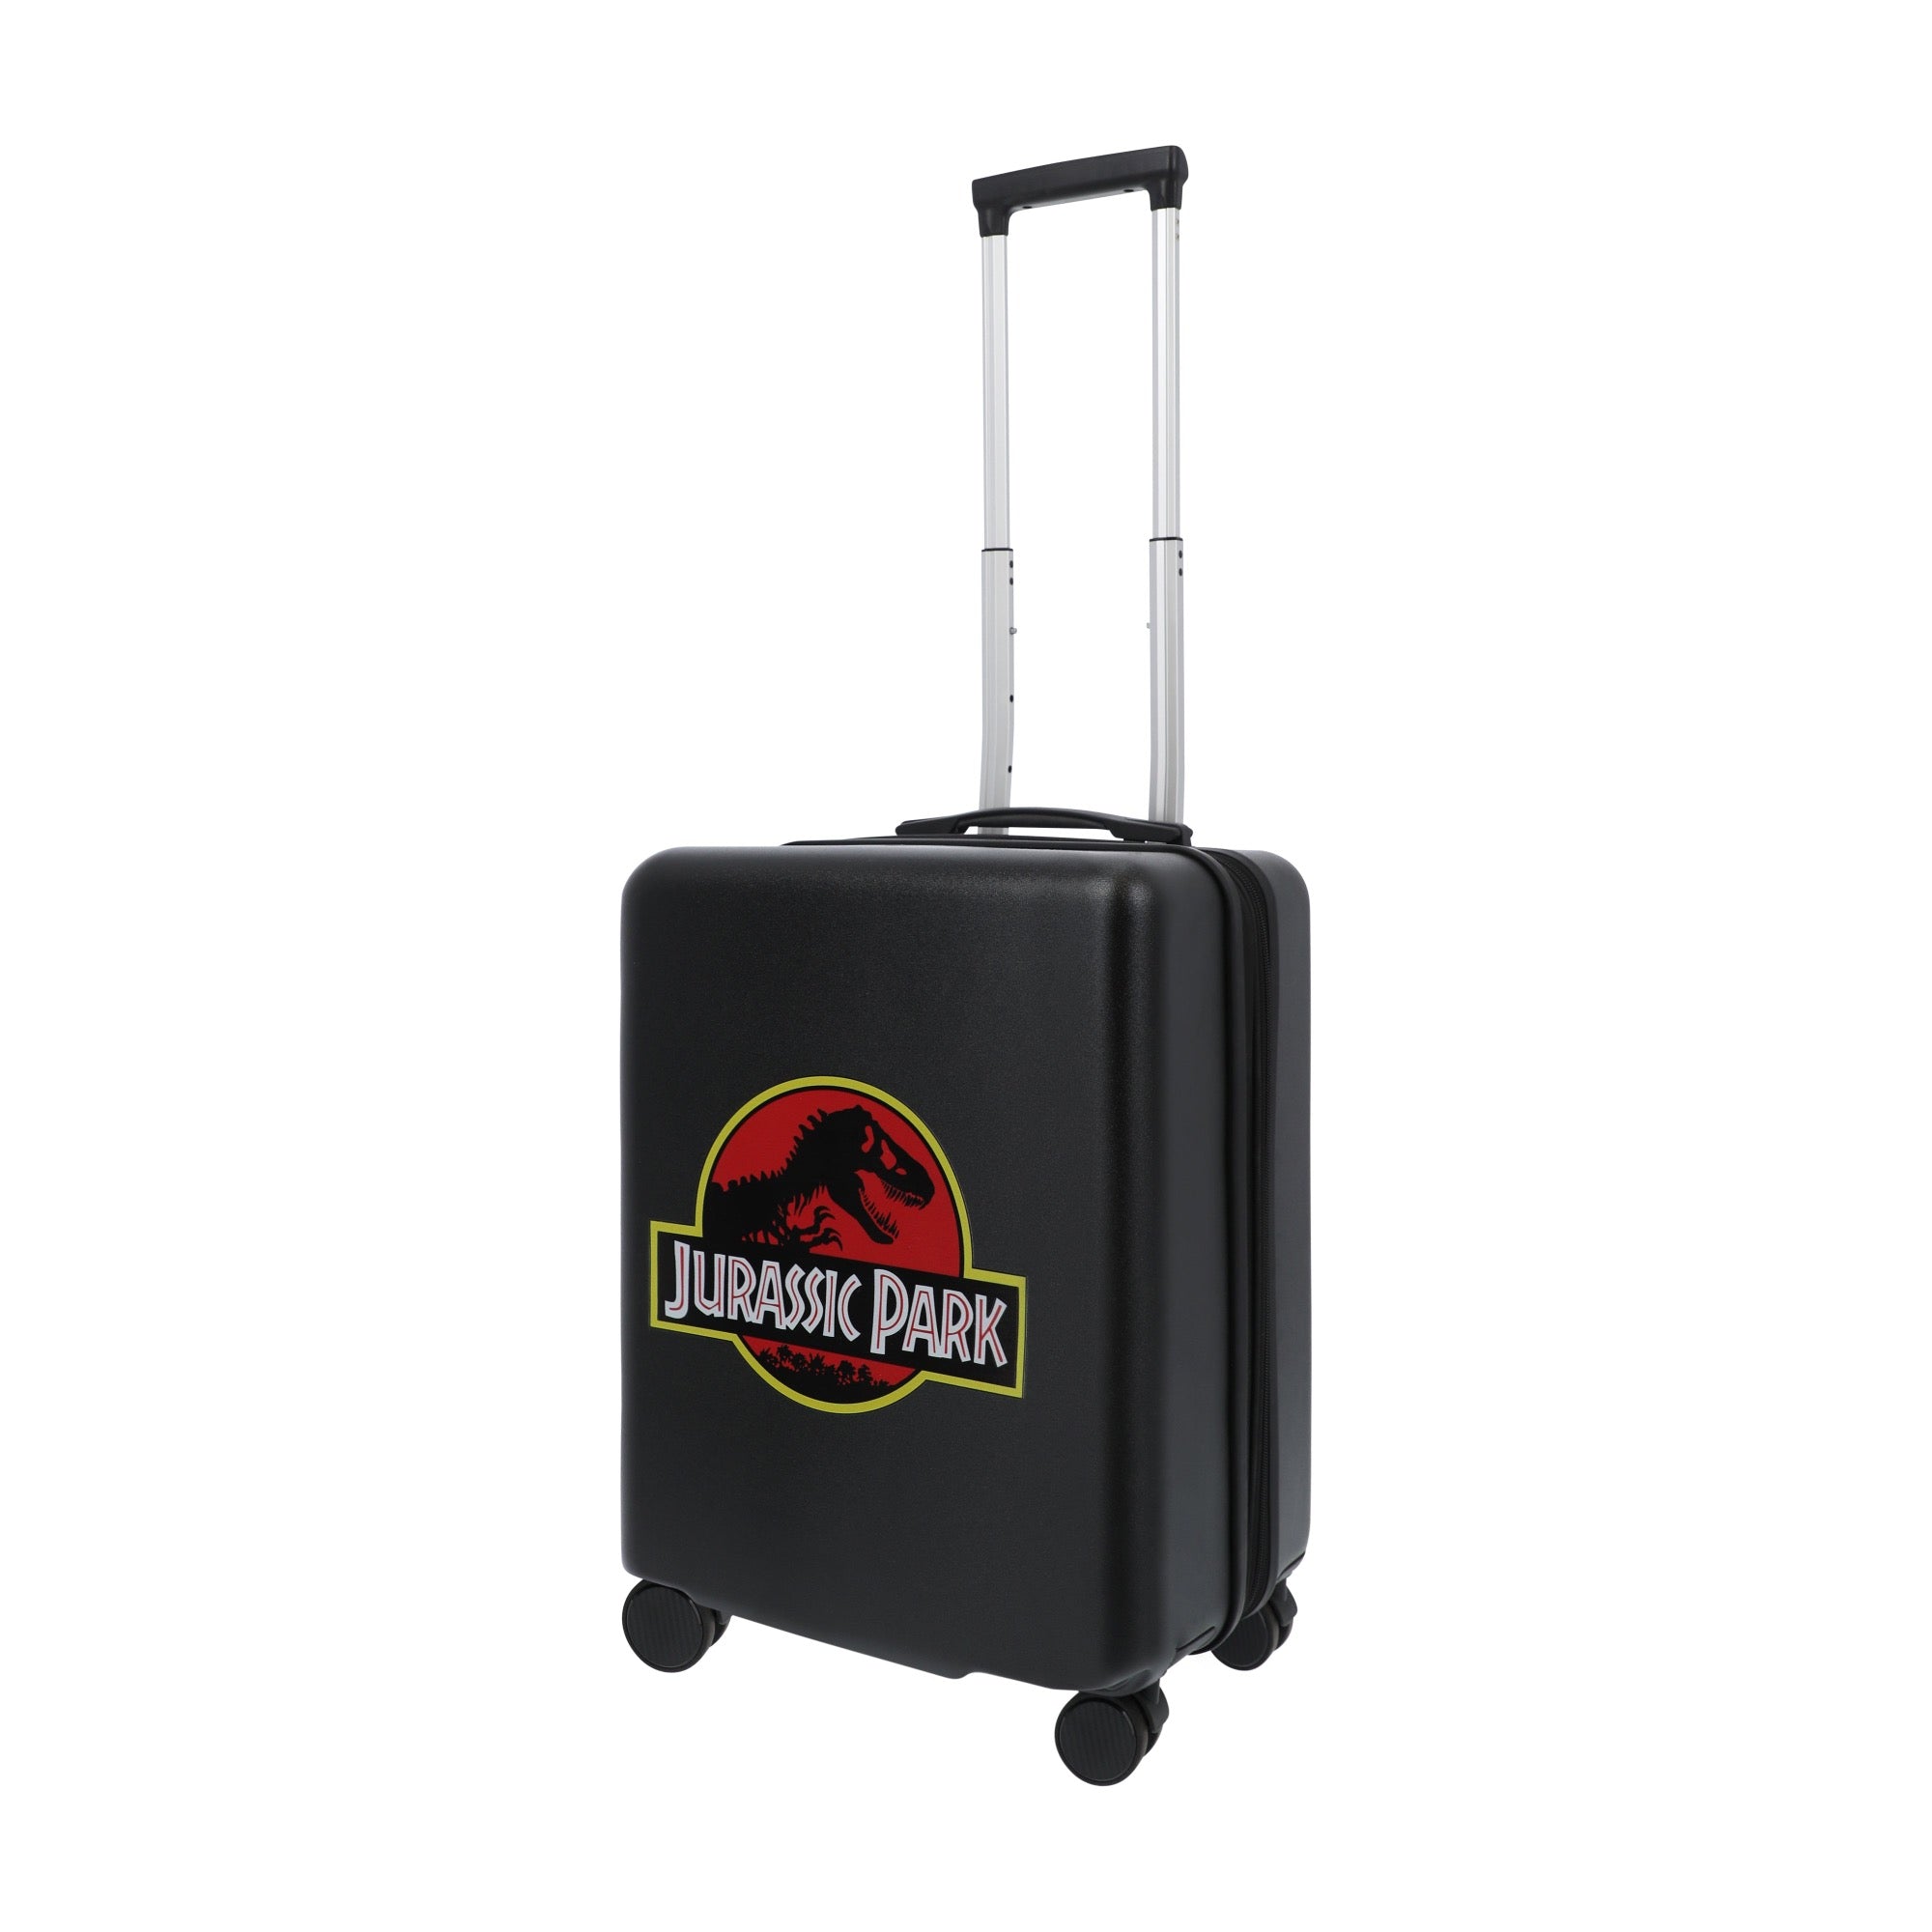 Black NBC studios jurassic park 22.5" carry-on spinner suitcase luggage by Ful